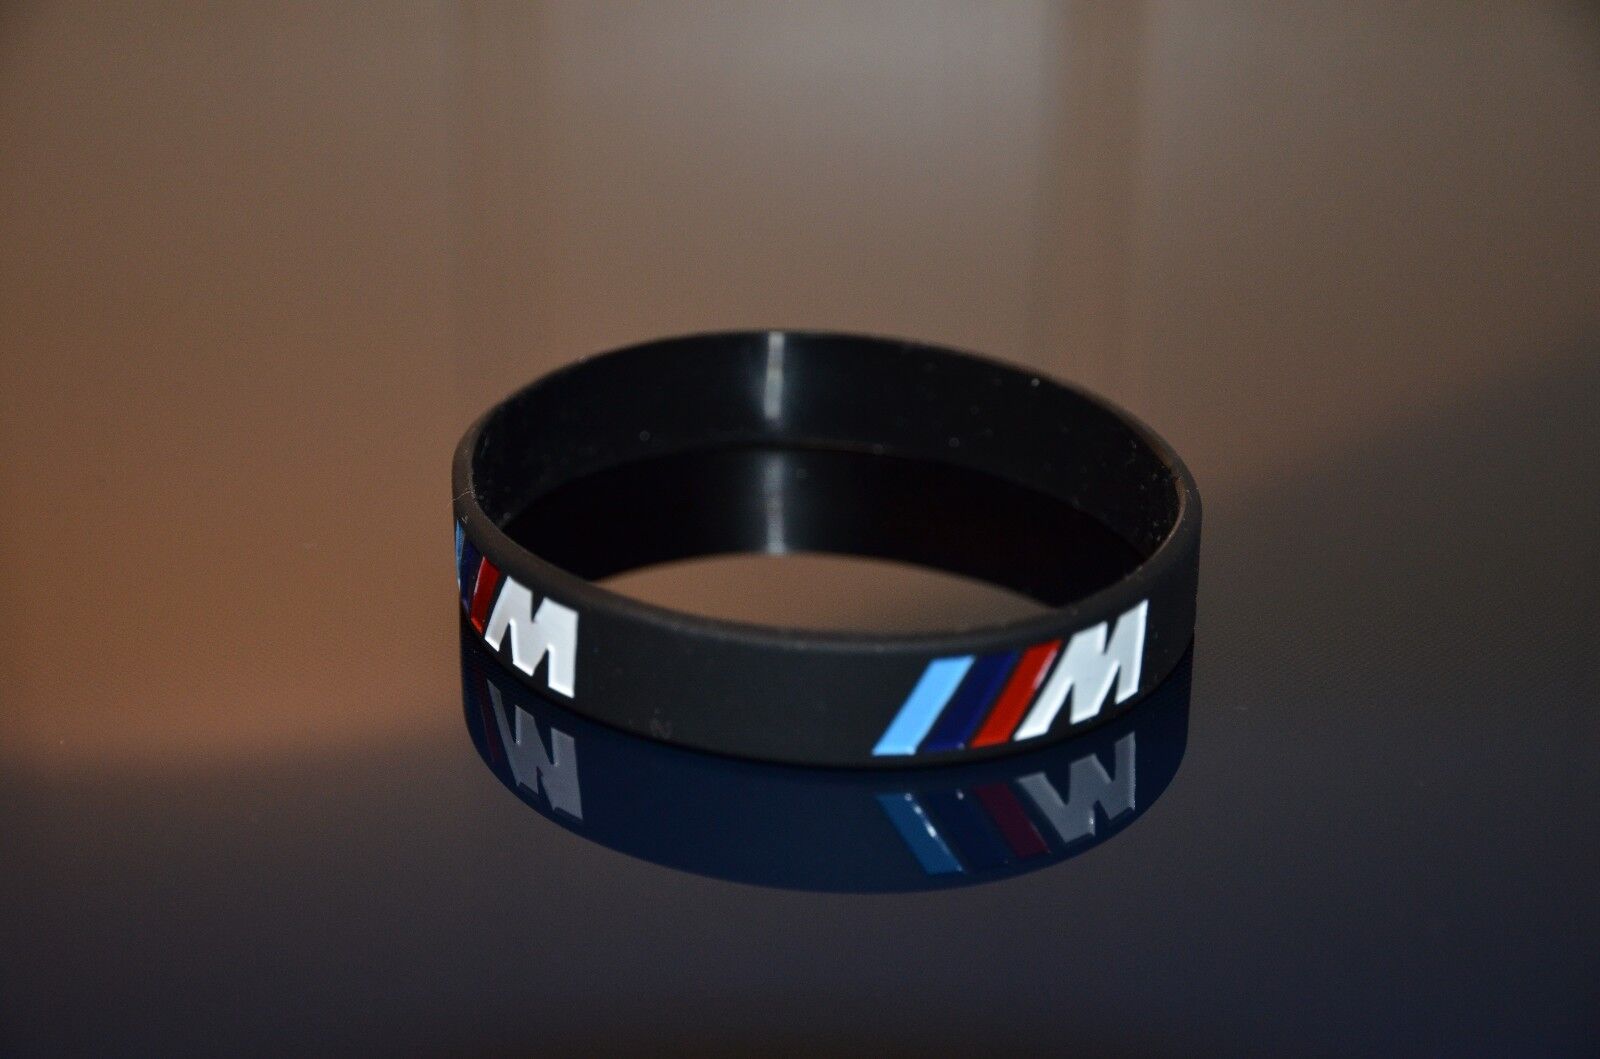 OFFICIAL BMW ///M-Performance Bracelet FREE Worldwide SHIPPING